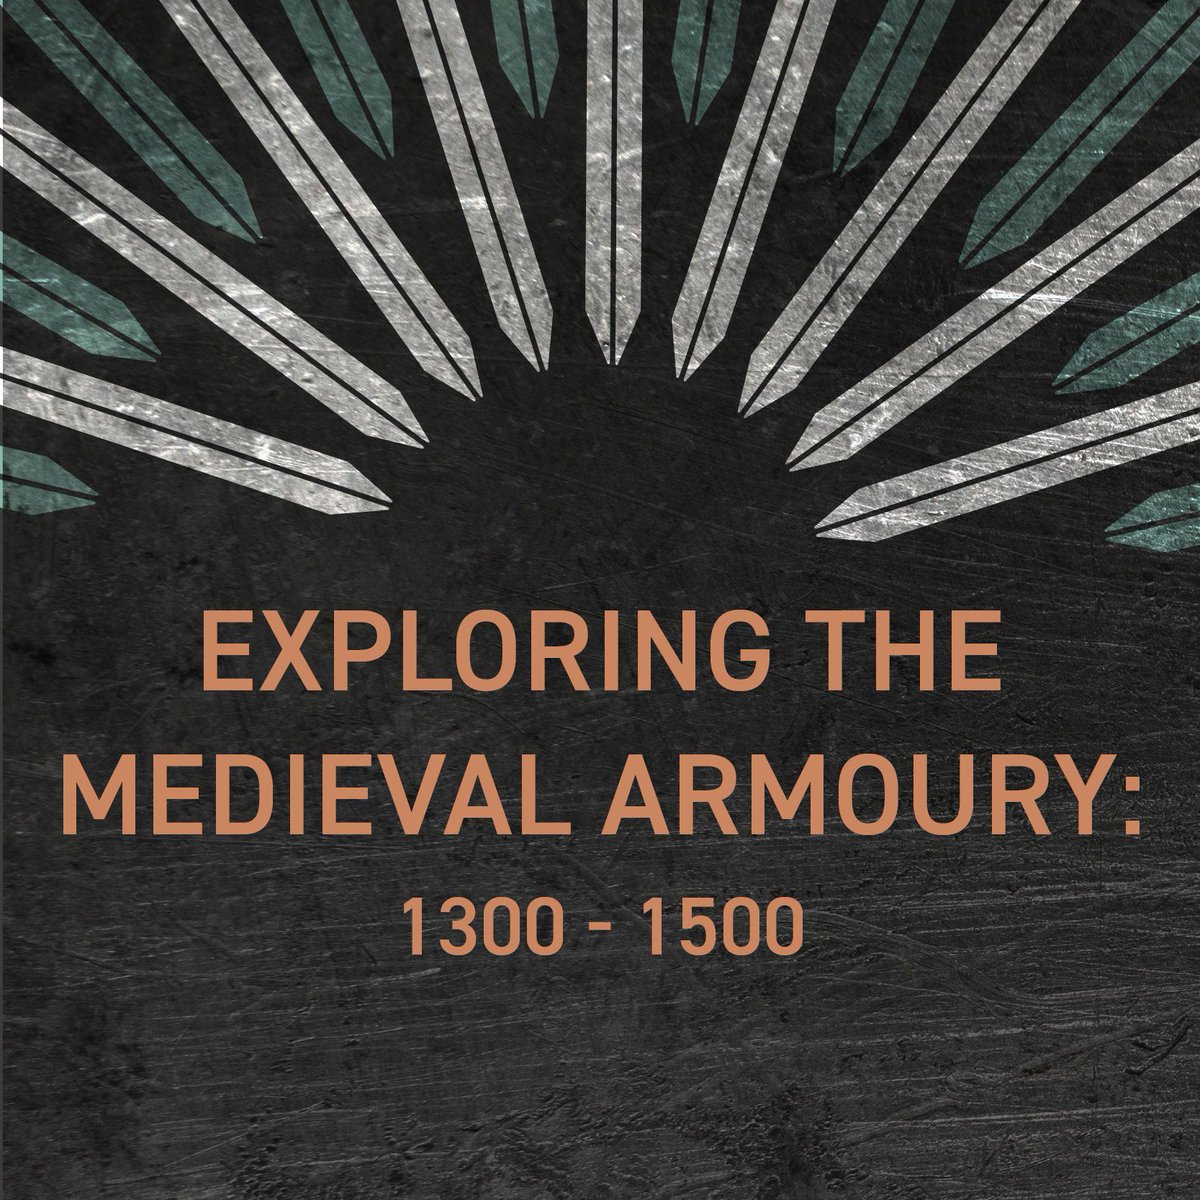 'I had not intended to write *three* books...' Glasgow Museums' Ralph Moffat on the challenges of covering three centuries of #Medieval military technological development. buff.ly/49JxKIQ @GlasgowMuseums #HEMA #MilitaryHistory